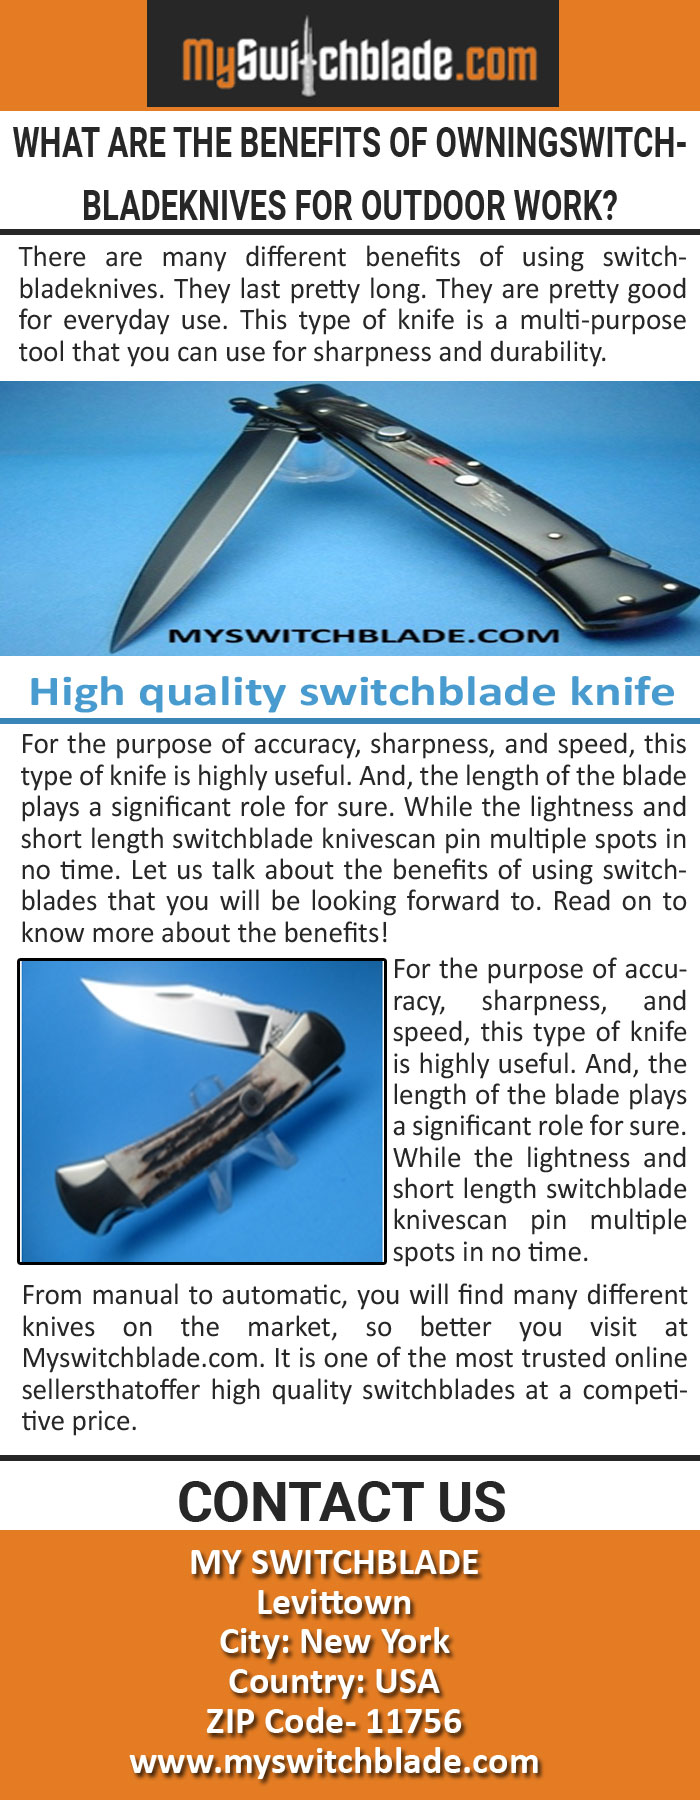 What are the benefits of Owning Switchblade Knives for Outdoor Work.jpg  by Myswitchblade